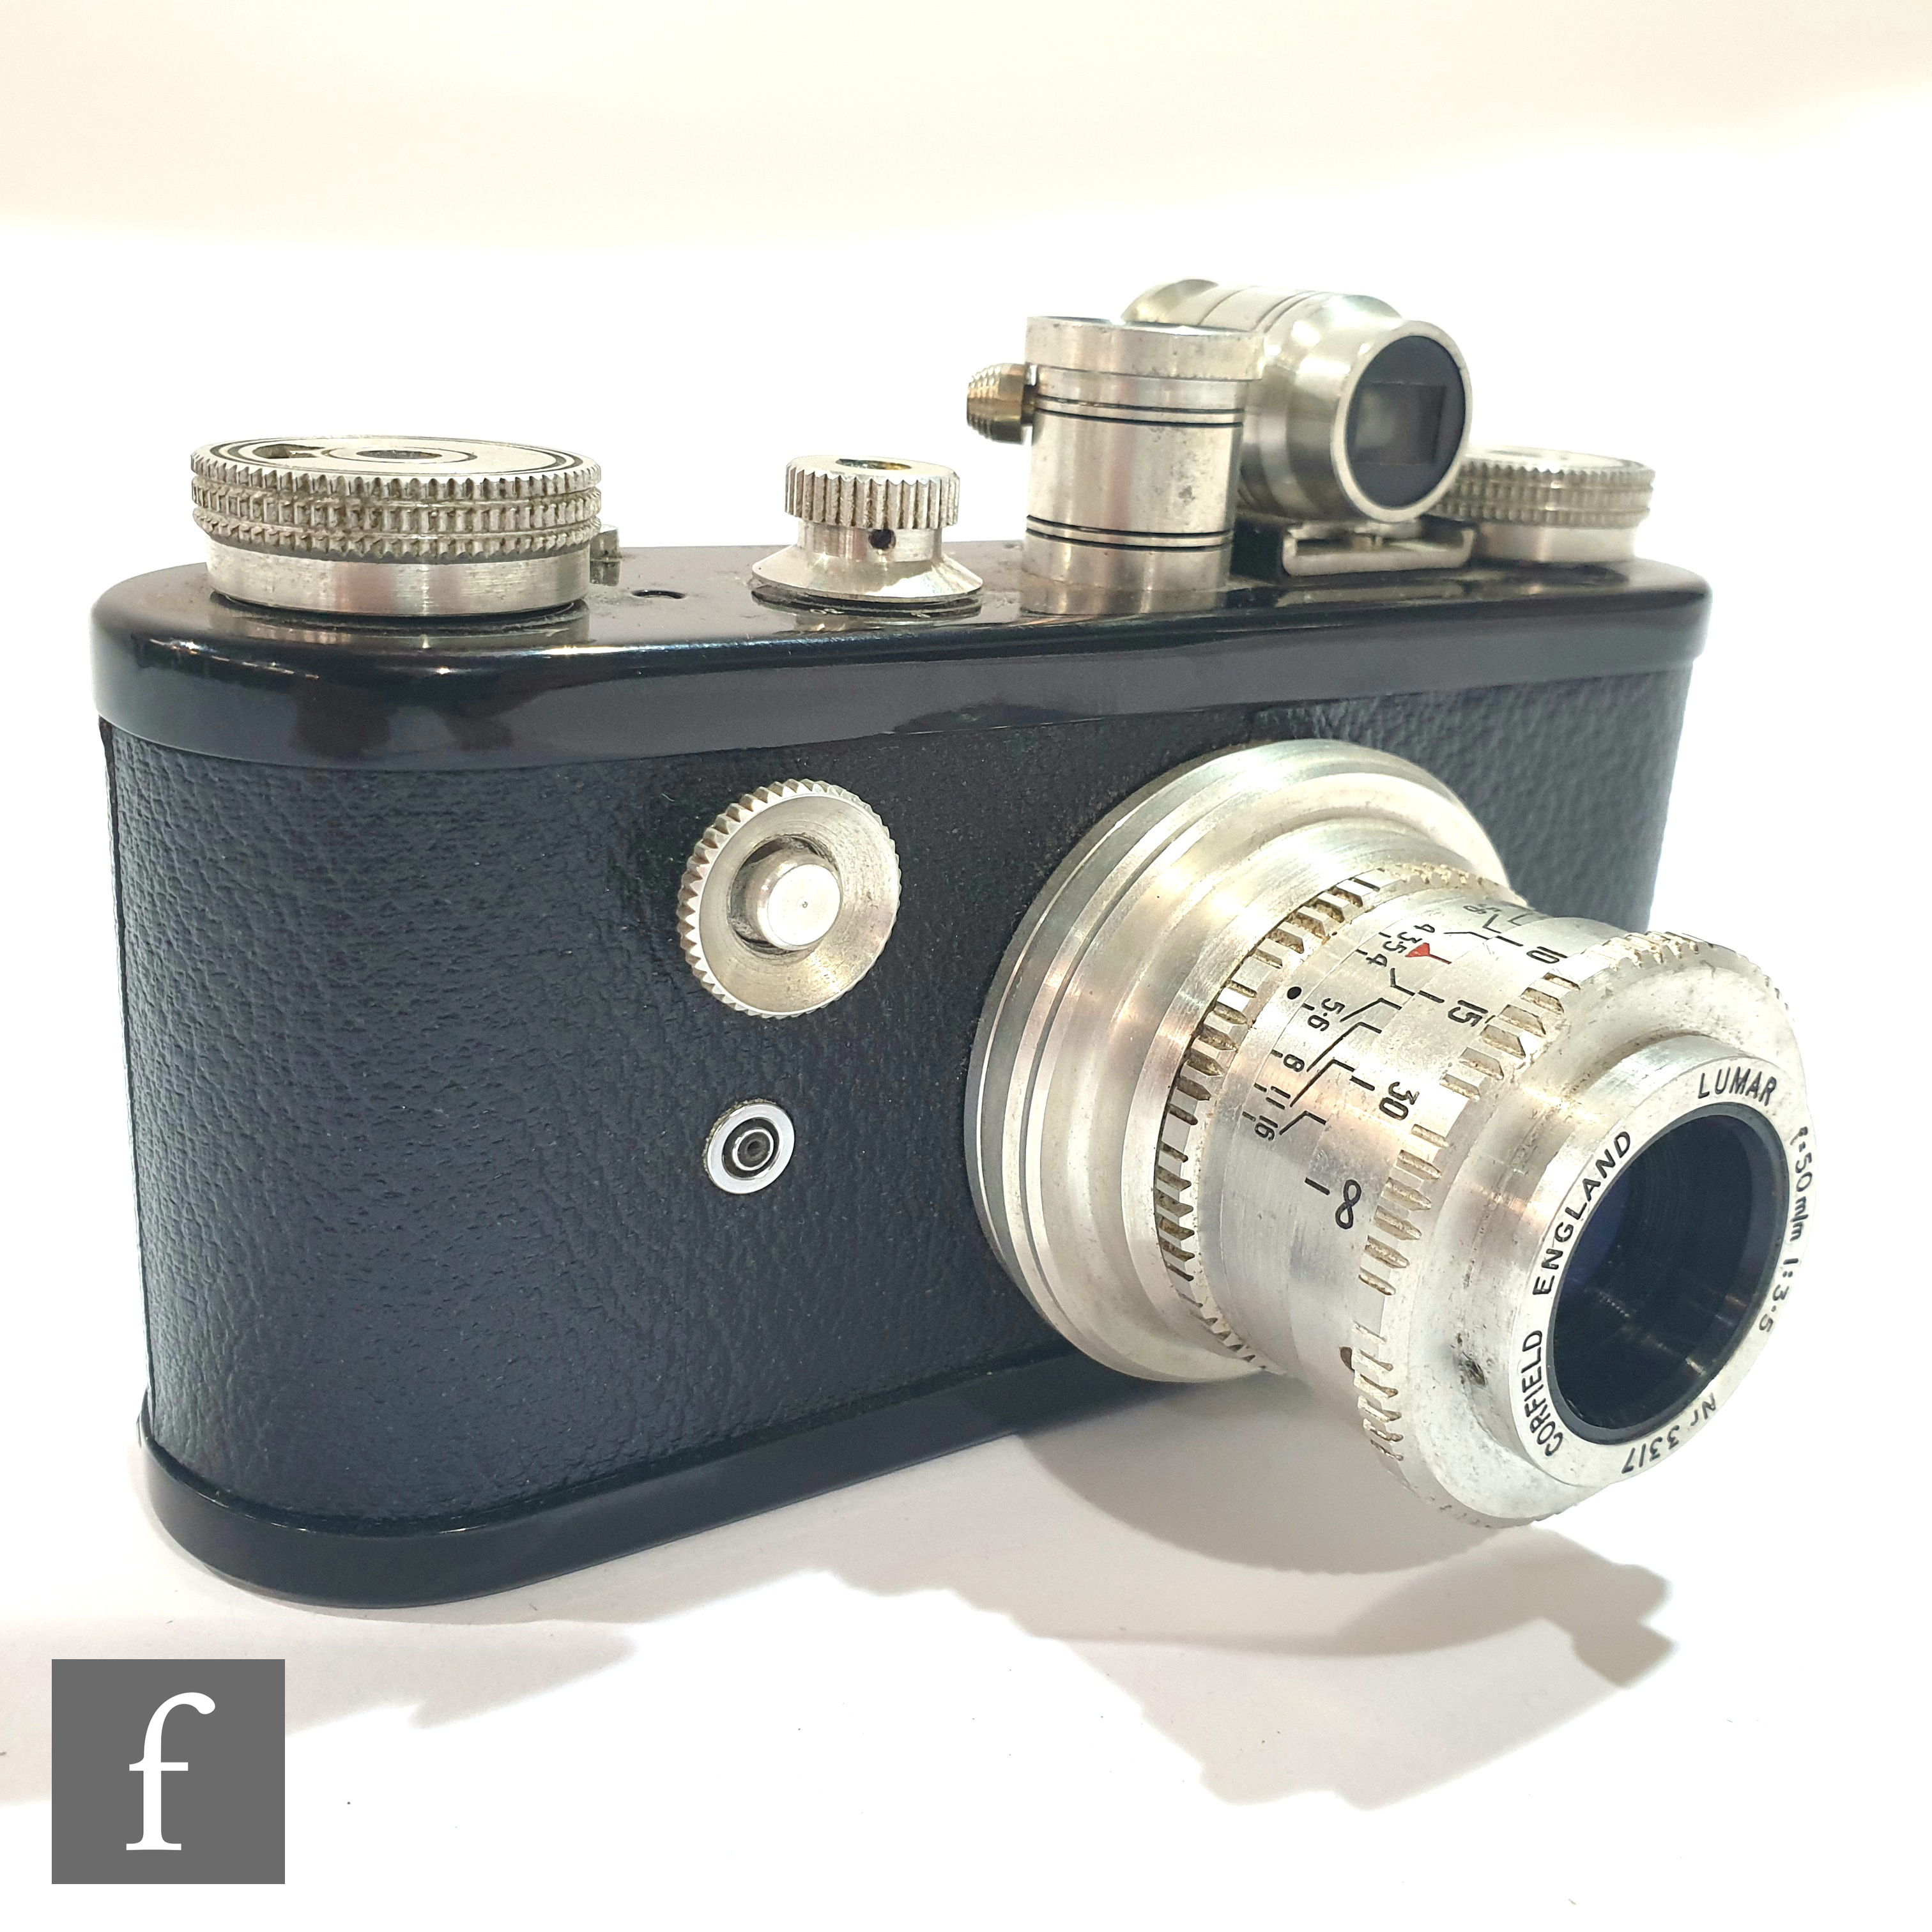 A 1954 Corfield Periflex I 35mm film camera, the black casing with Snap-on viewfinder and SLR-type